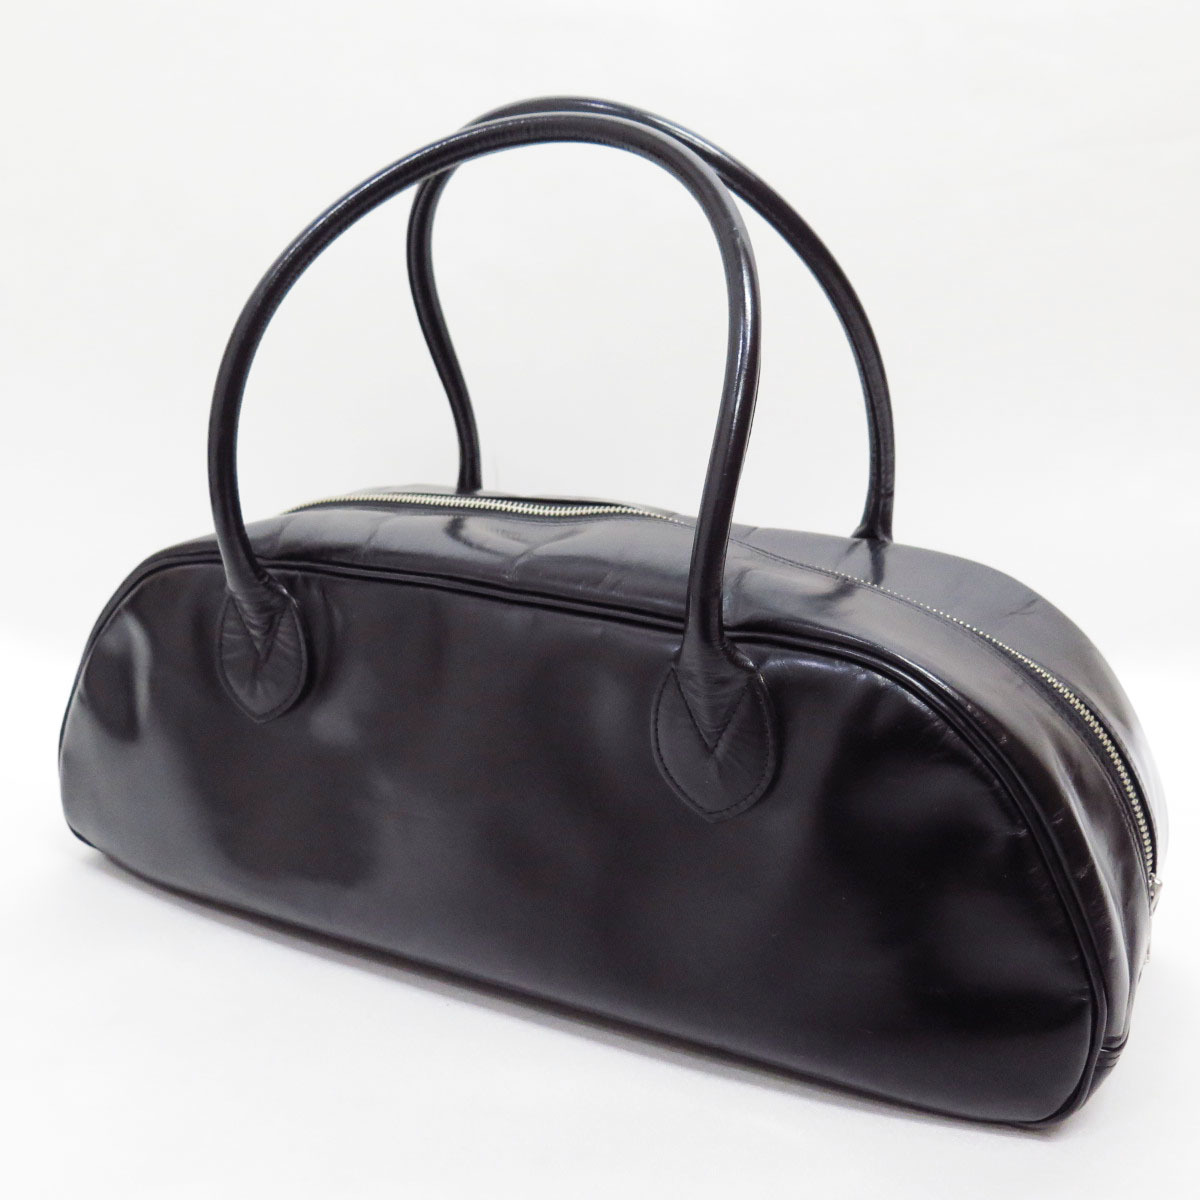 COMME des GARCONS EMBOSS LOGO LEATEHR DUFFLE BAG コムデギャルソン エンボス ロゴ ガラス レザー ボストン バッグ_画像3